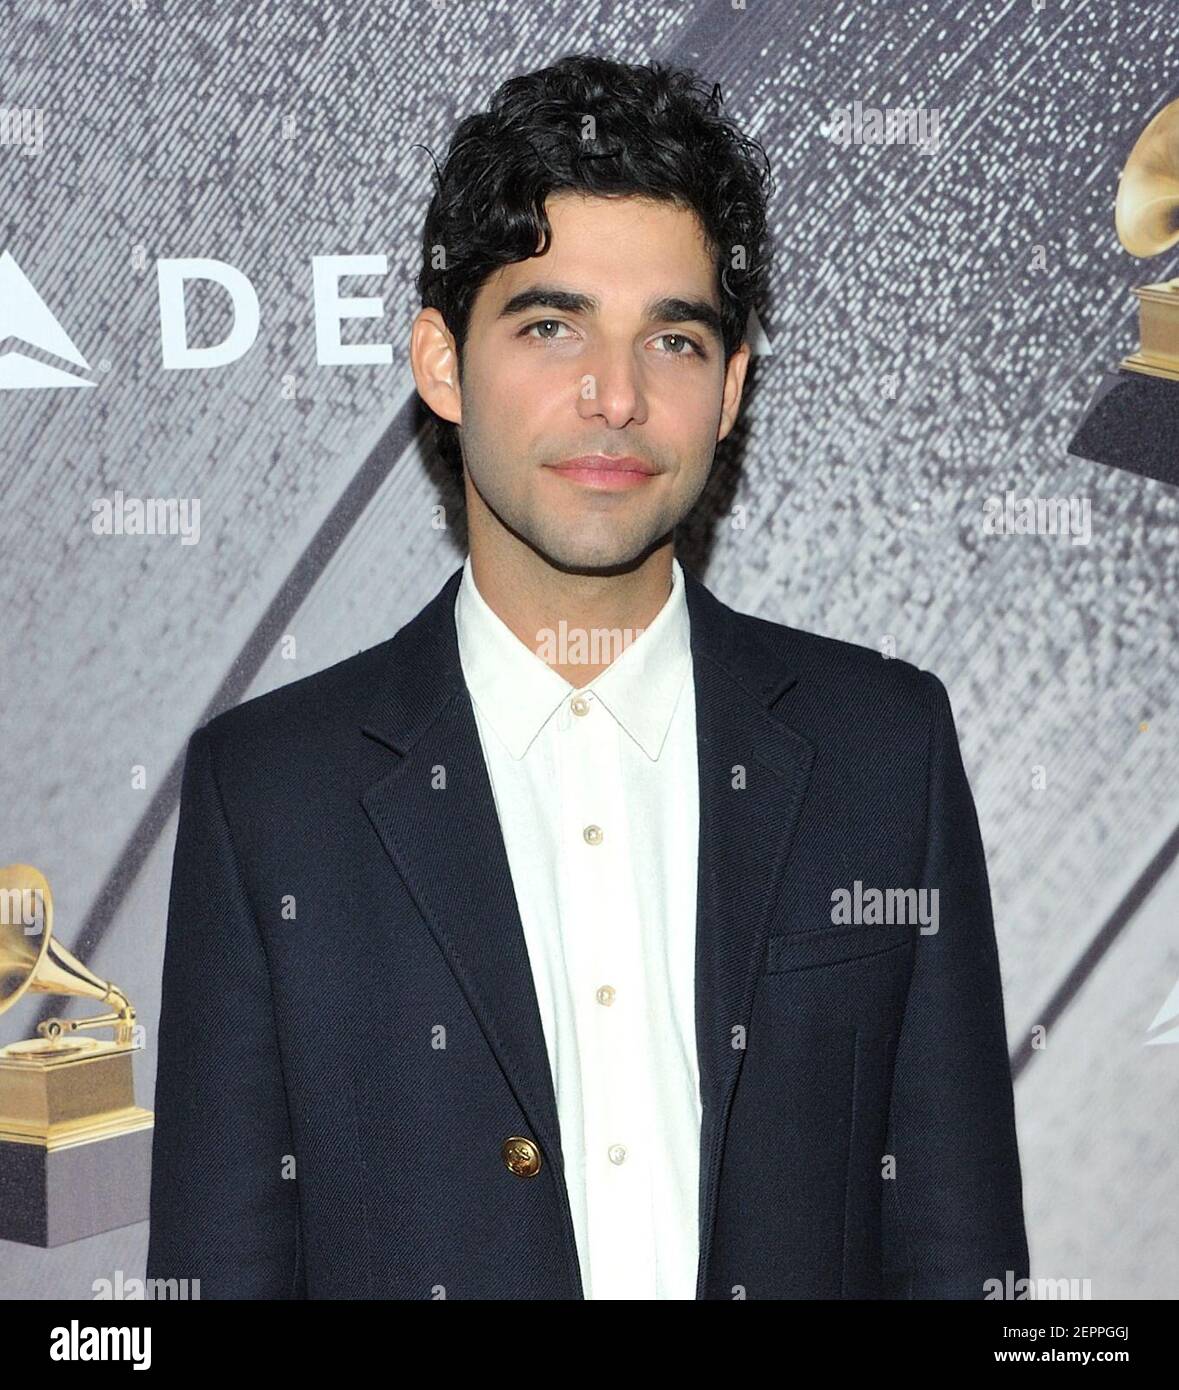 Singer/songwriter Jackson Penn attends the Delta Air Lines 2018 Grammy Weekend private reception at The Bowery Hotel in New York, NY on January 25, 2018. (Photo by Stephen Smith/SIPA USA) Stock Photo